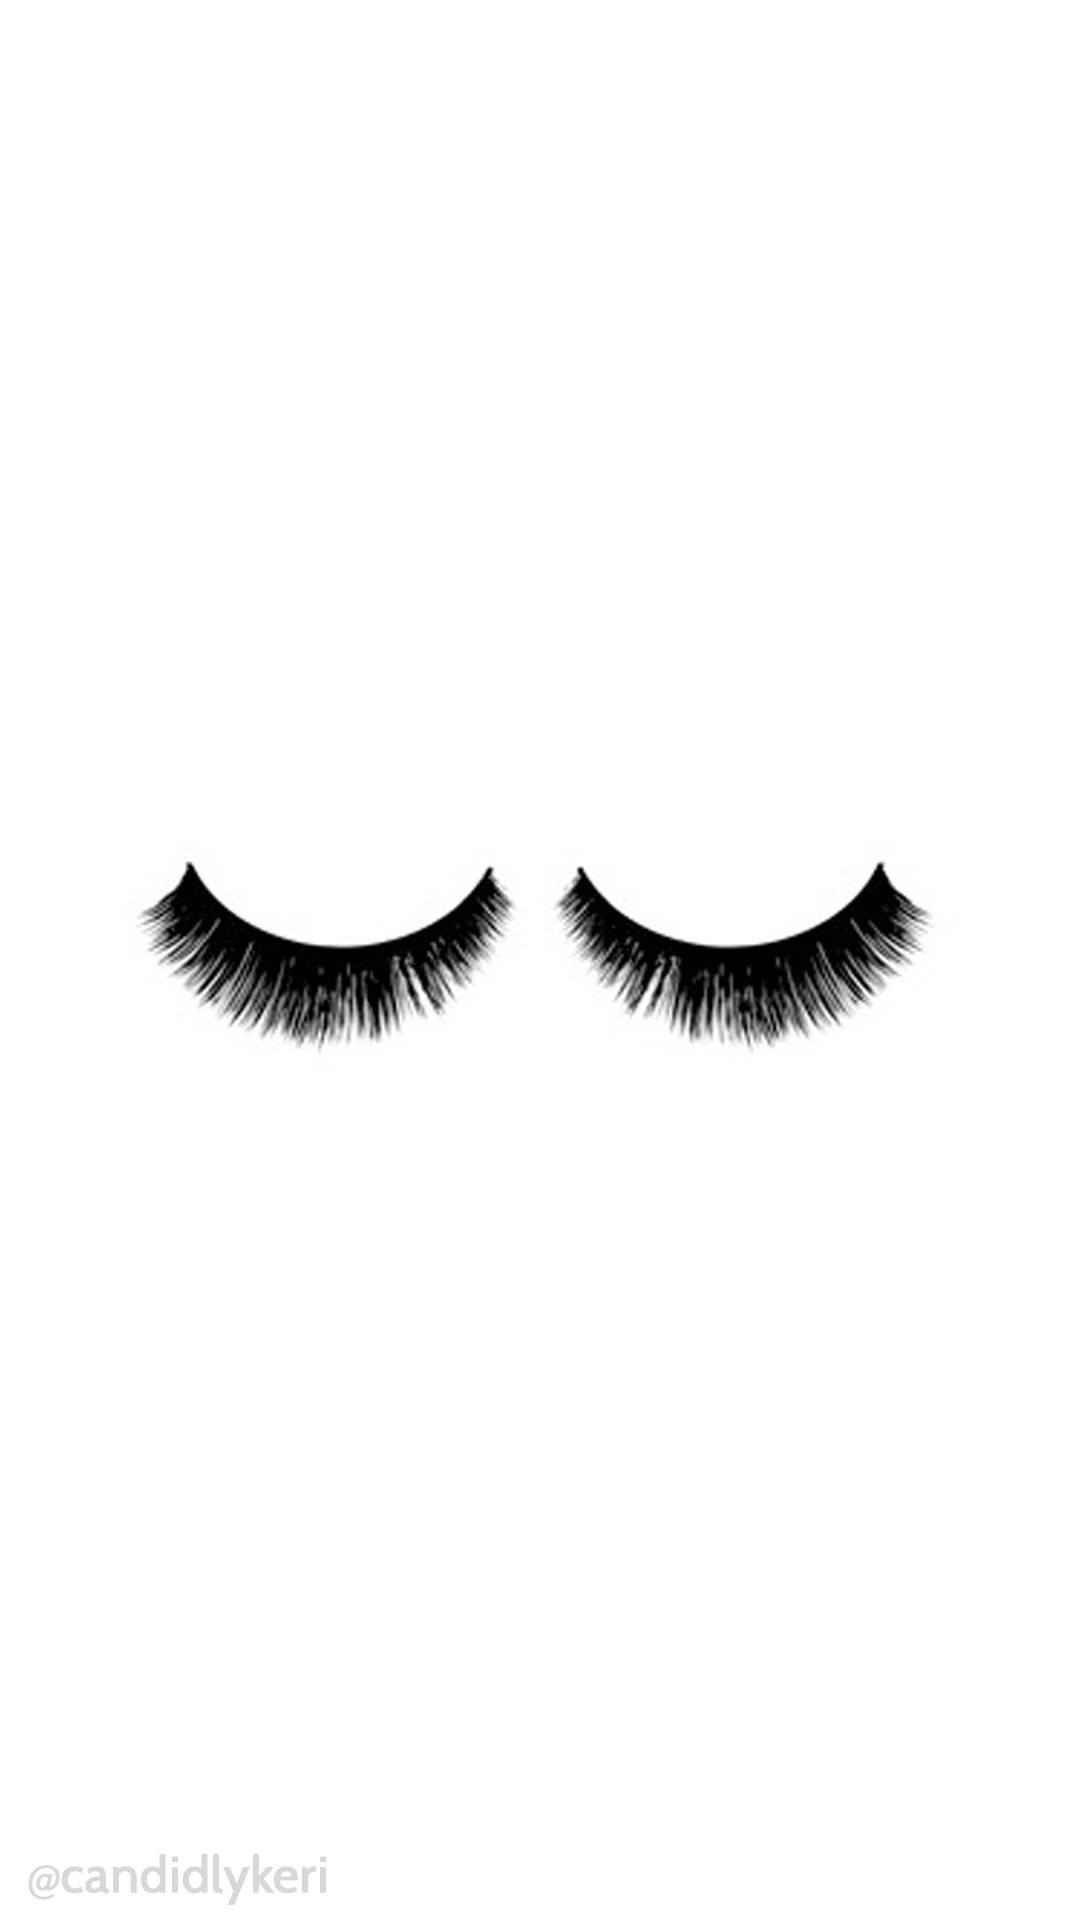 1080x1920 Eyelashes Fake lashes sleepy background wallpaper you can download for free  on the blog! For